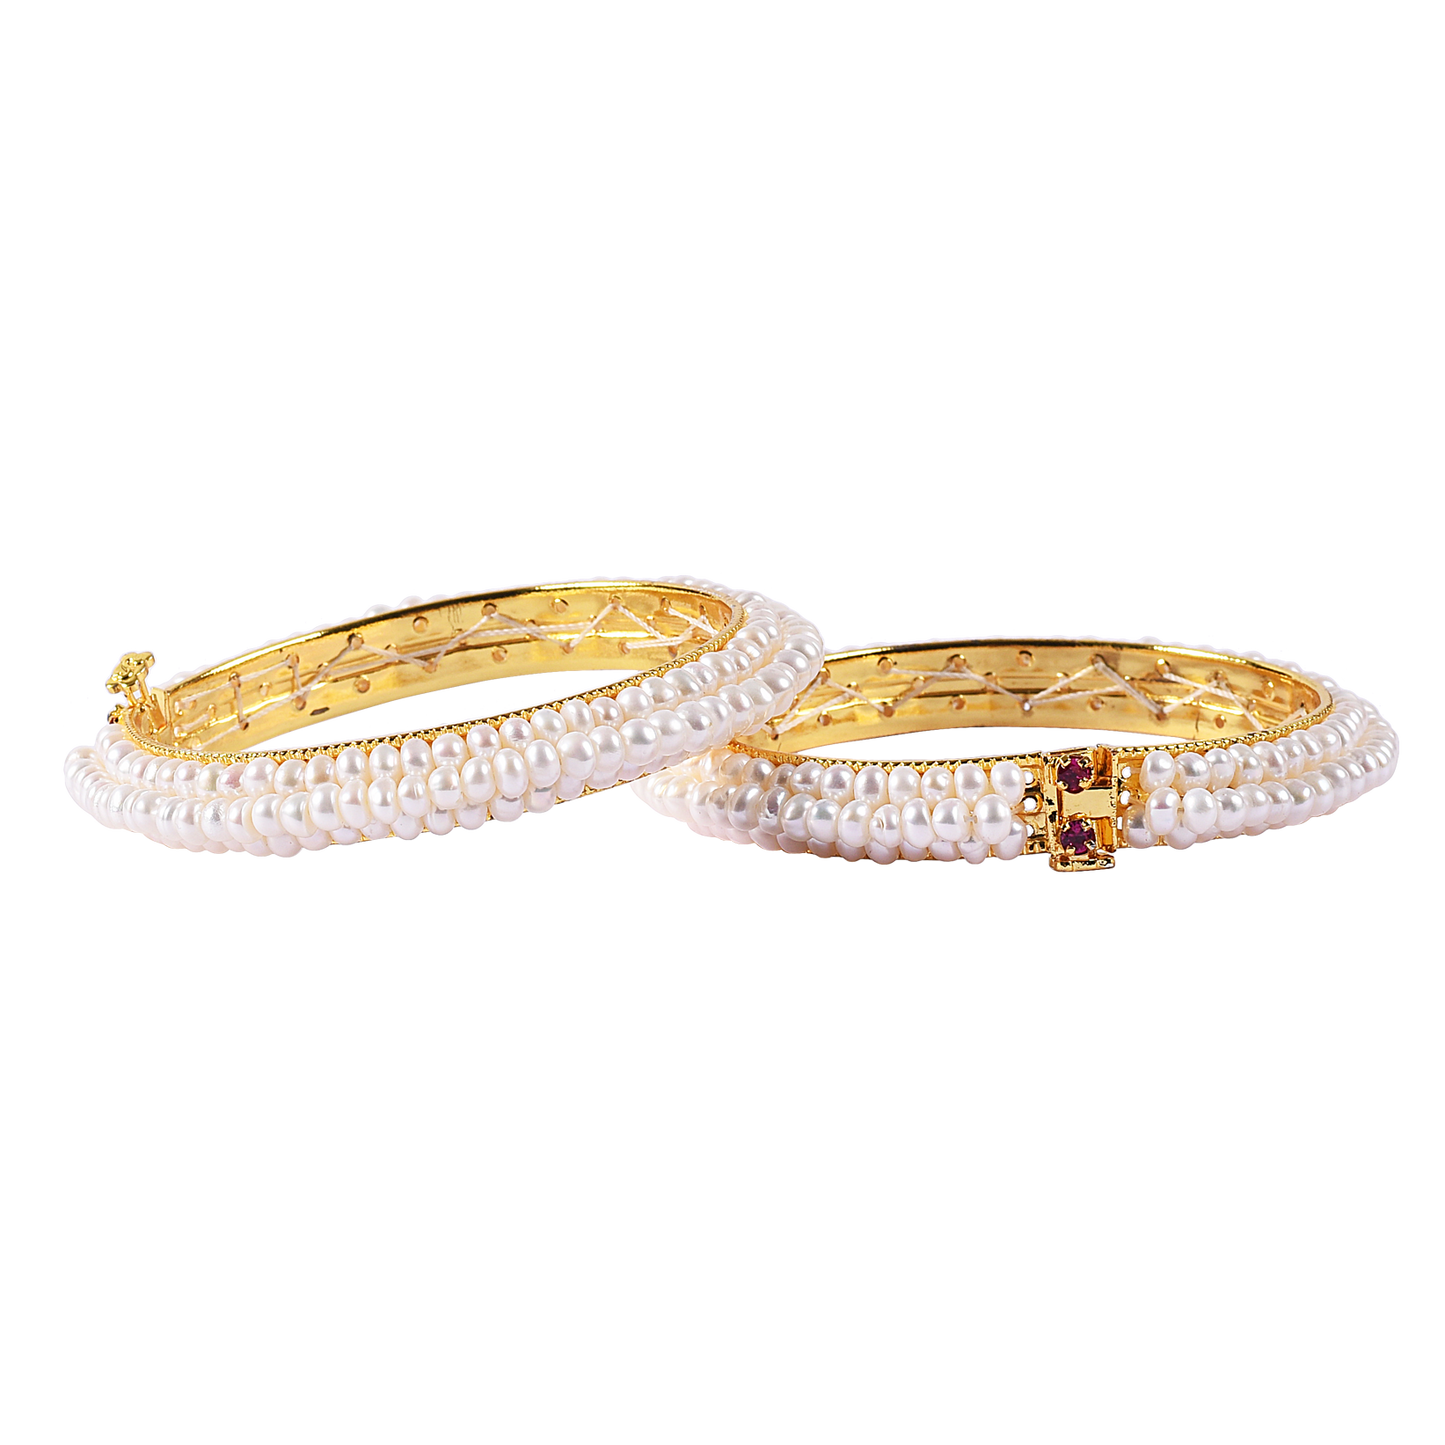 Snow White 3 layer Gold Tone Pearl Bangles with Adjustable Lock